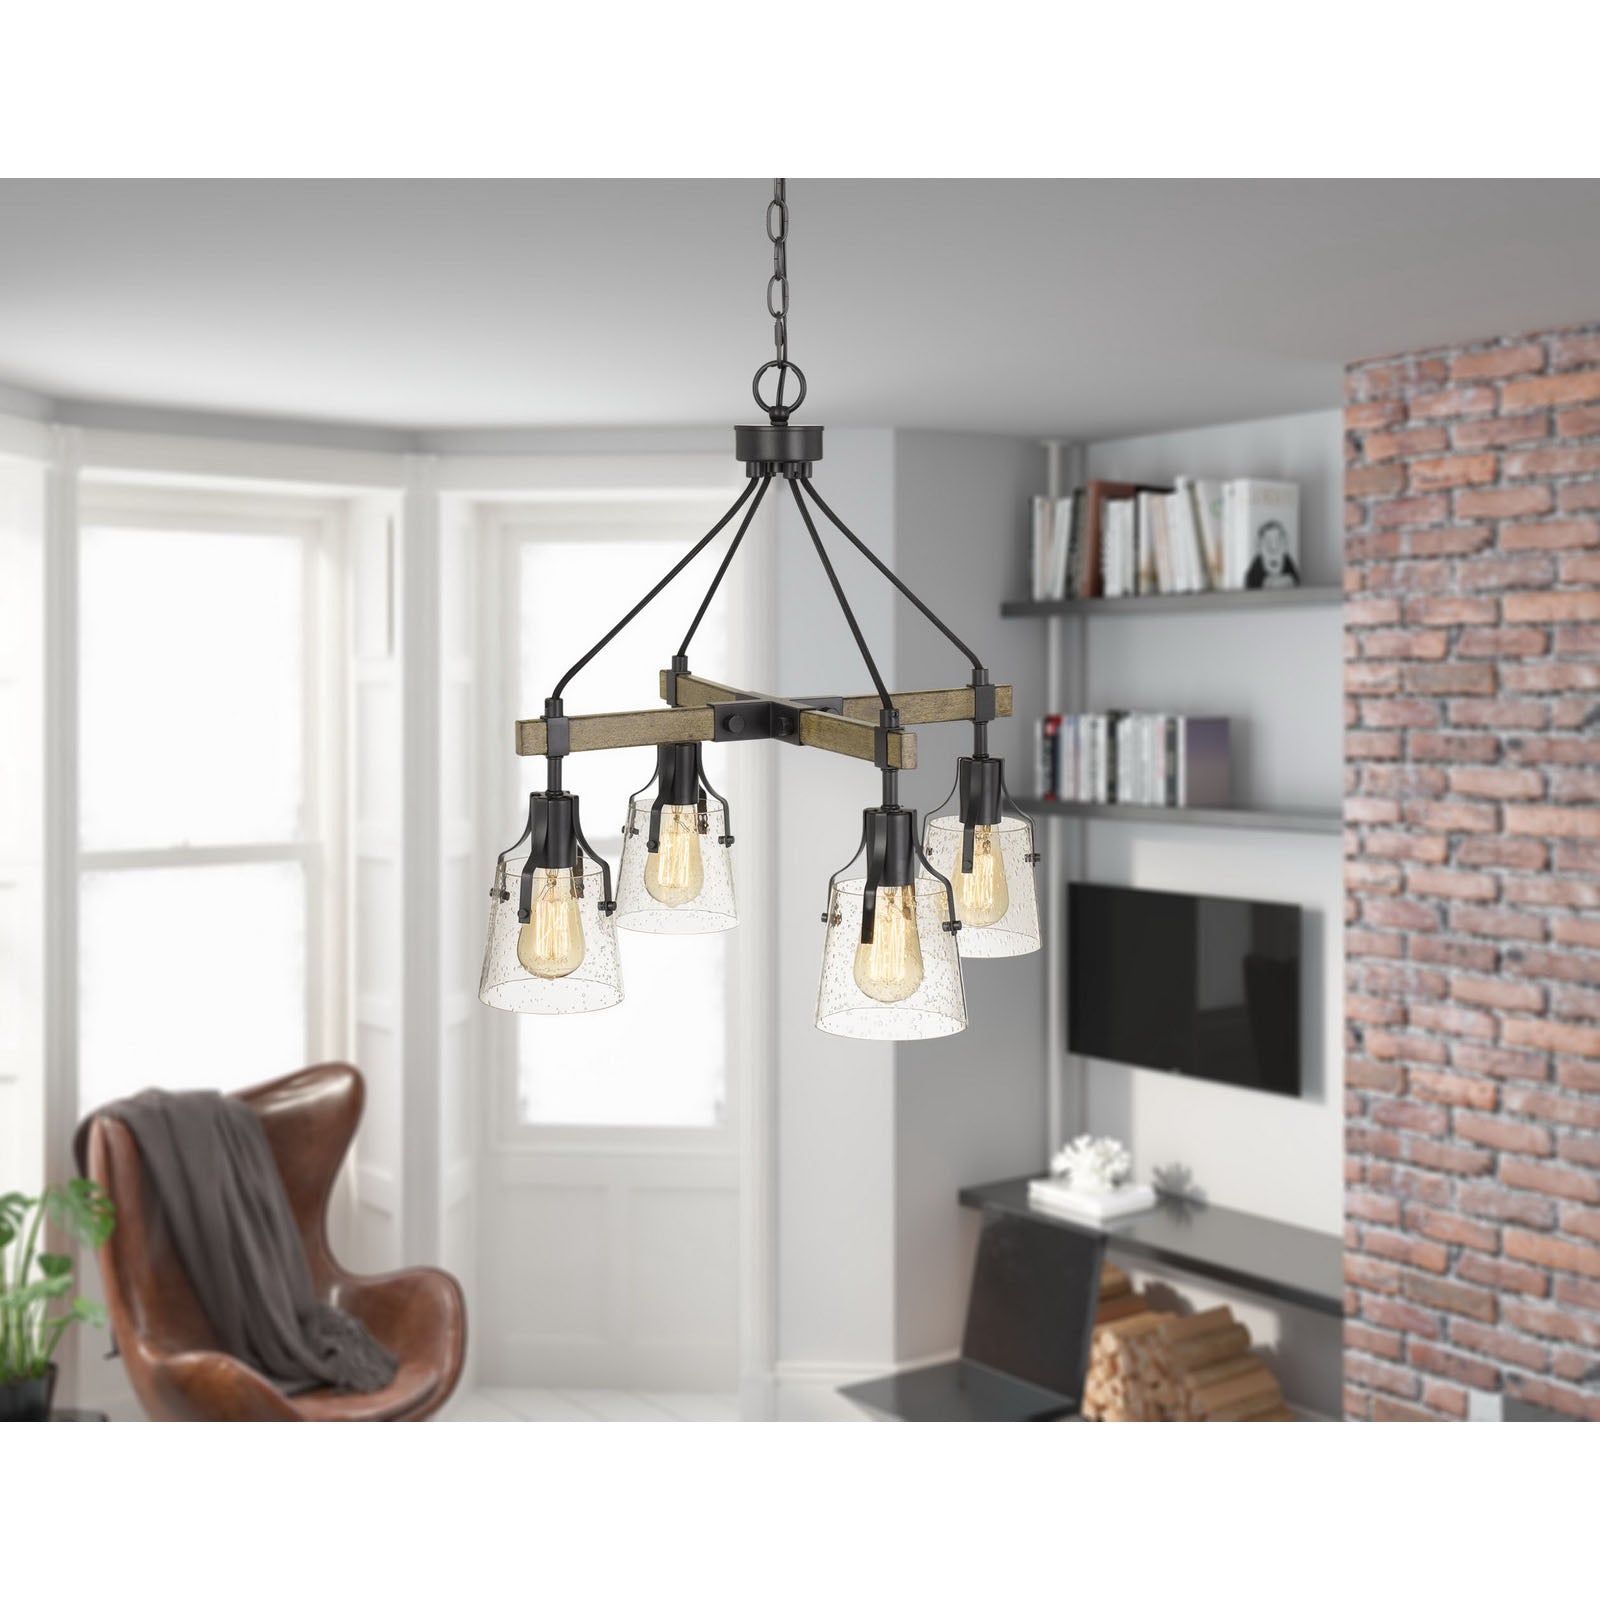 Cal Lighting 60W X 4 Aosta Metal Chandelier With Bubbled Glass Shades (Edison Bulbs Are Not Included)